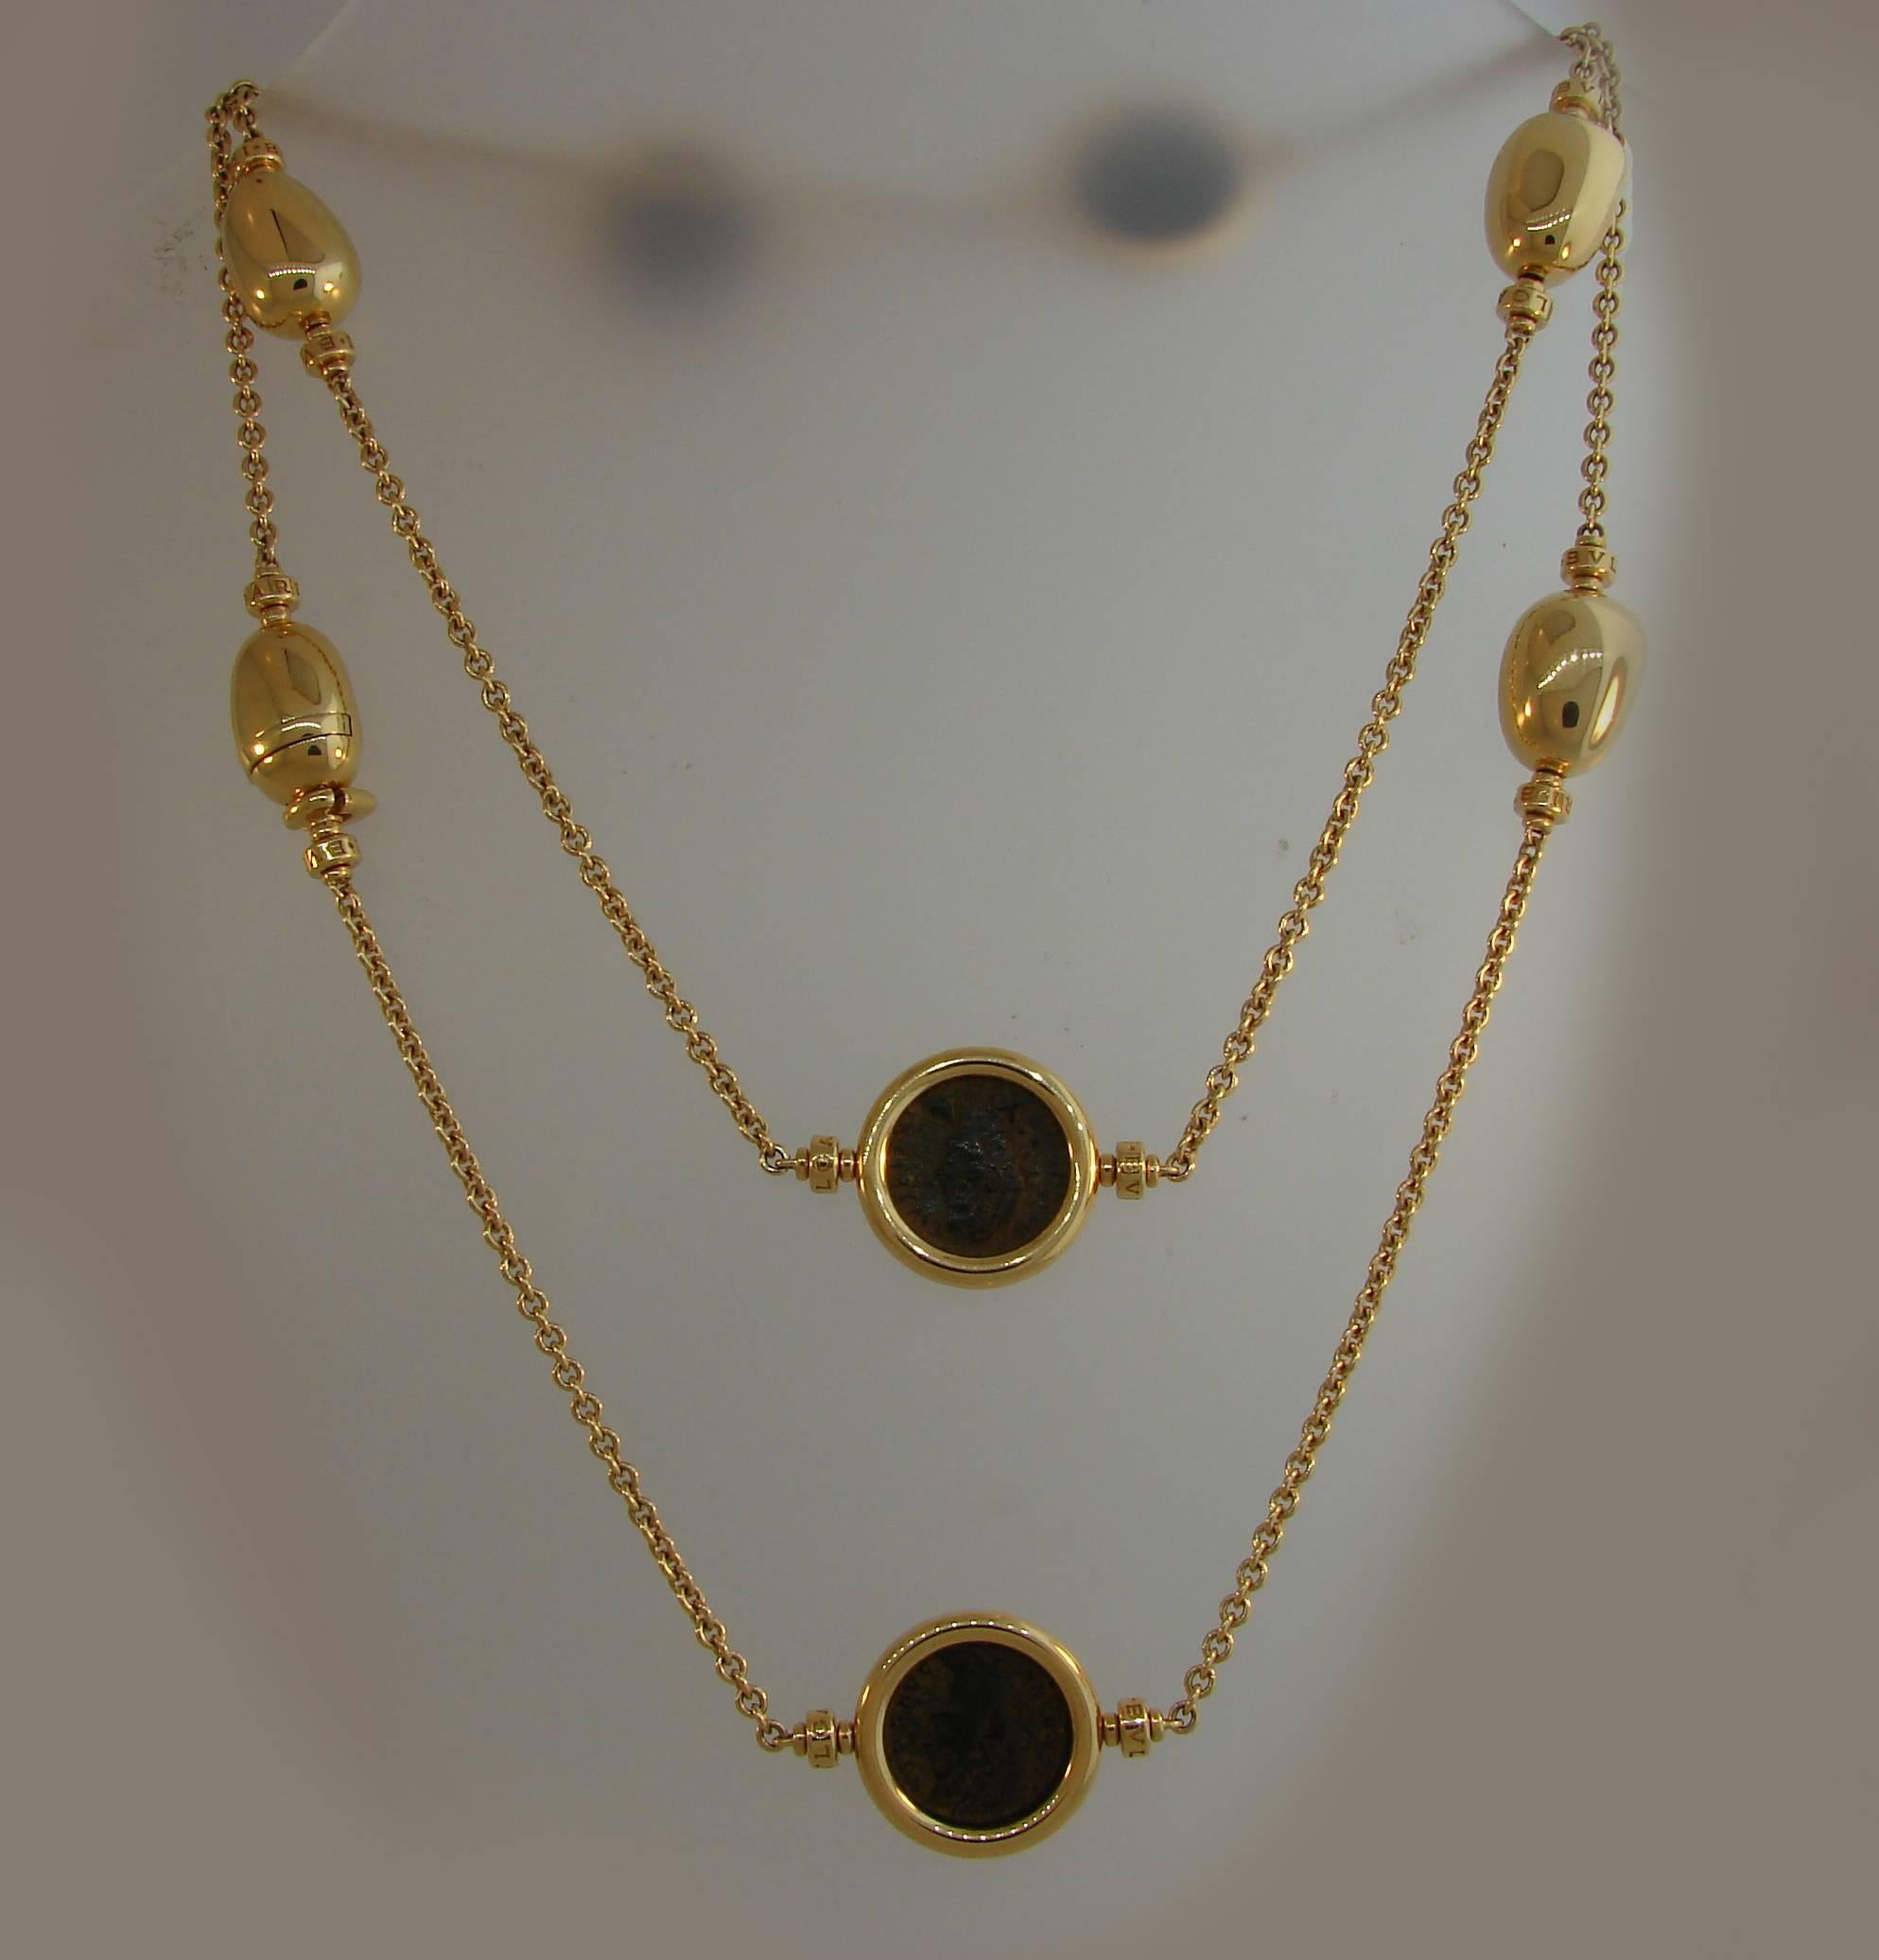 Unusual Bulgari coin necklace featuring four ancient Roman bronze coins. Trendy, elegant and wearable, the necklace is a great addition to your jewelry collection.
The coins are 5/8 inch (1.6 cm) in diameter, and dated A.D. 337-408. The rest of the